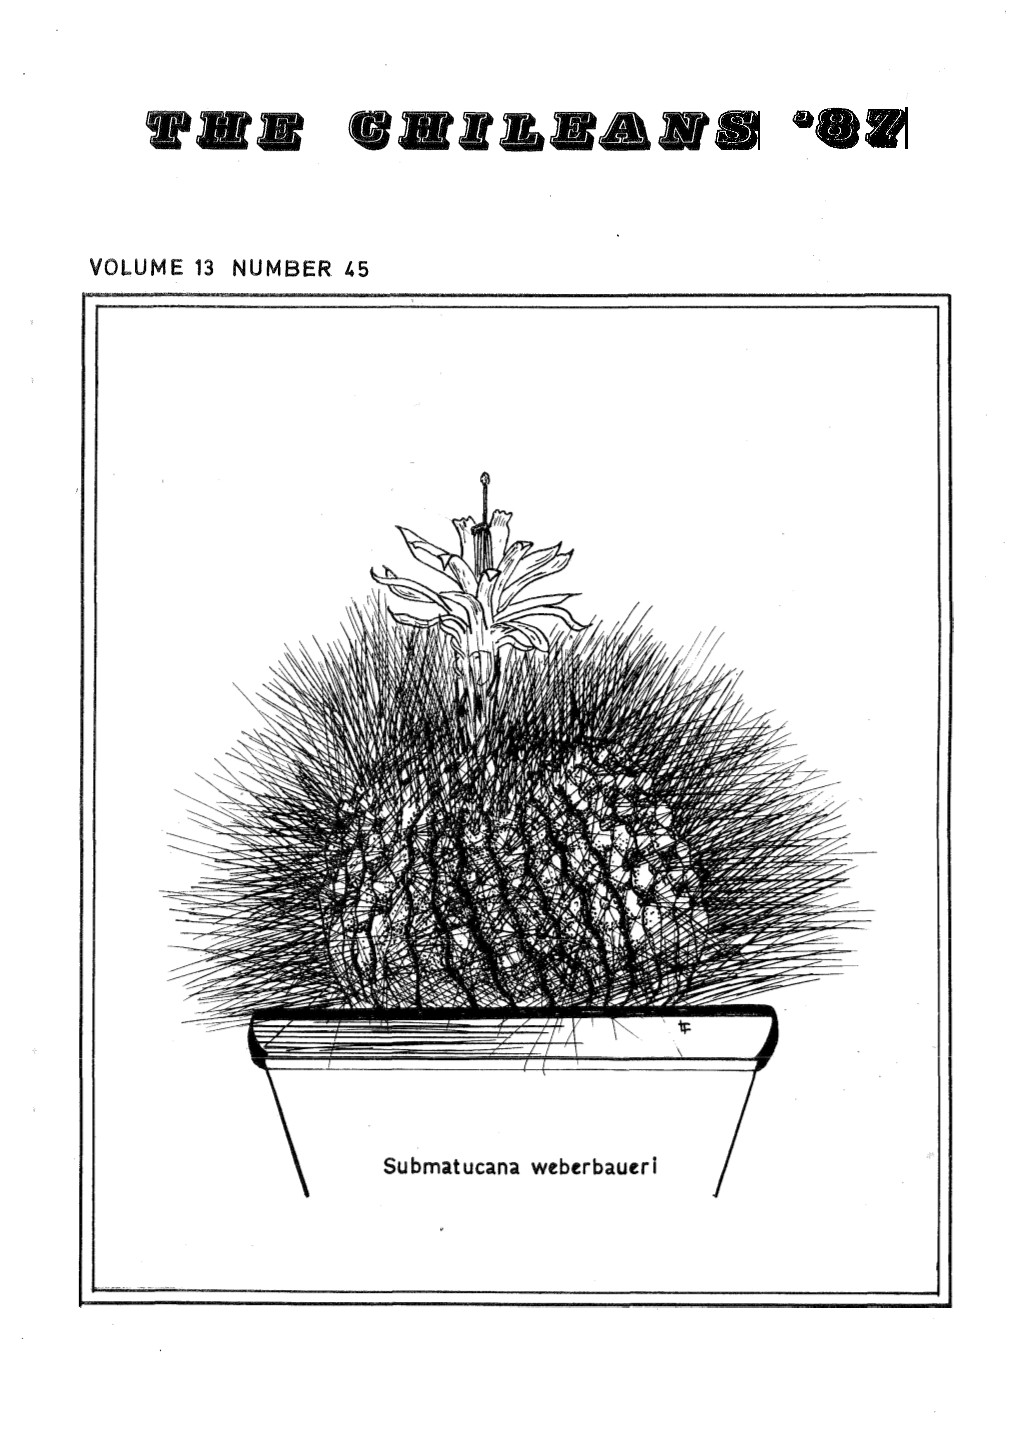 FRUIT of WEINGARTIA and SULCOREBUTIA by K.Augustin and G.Tyrasseck